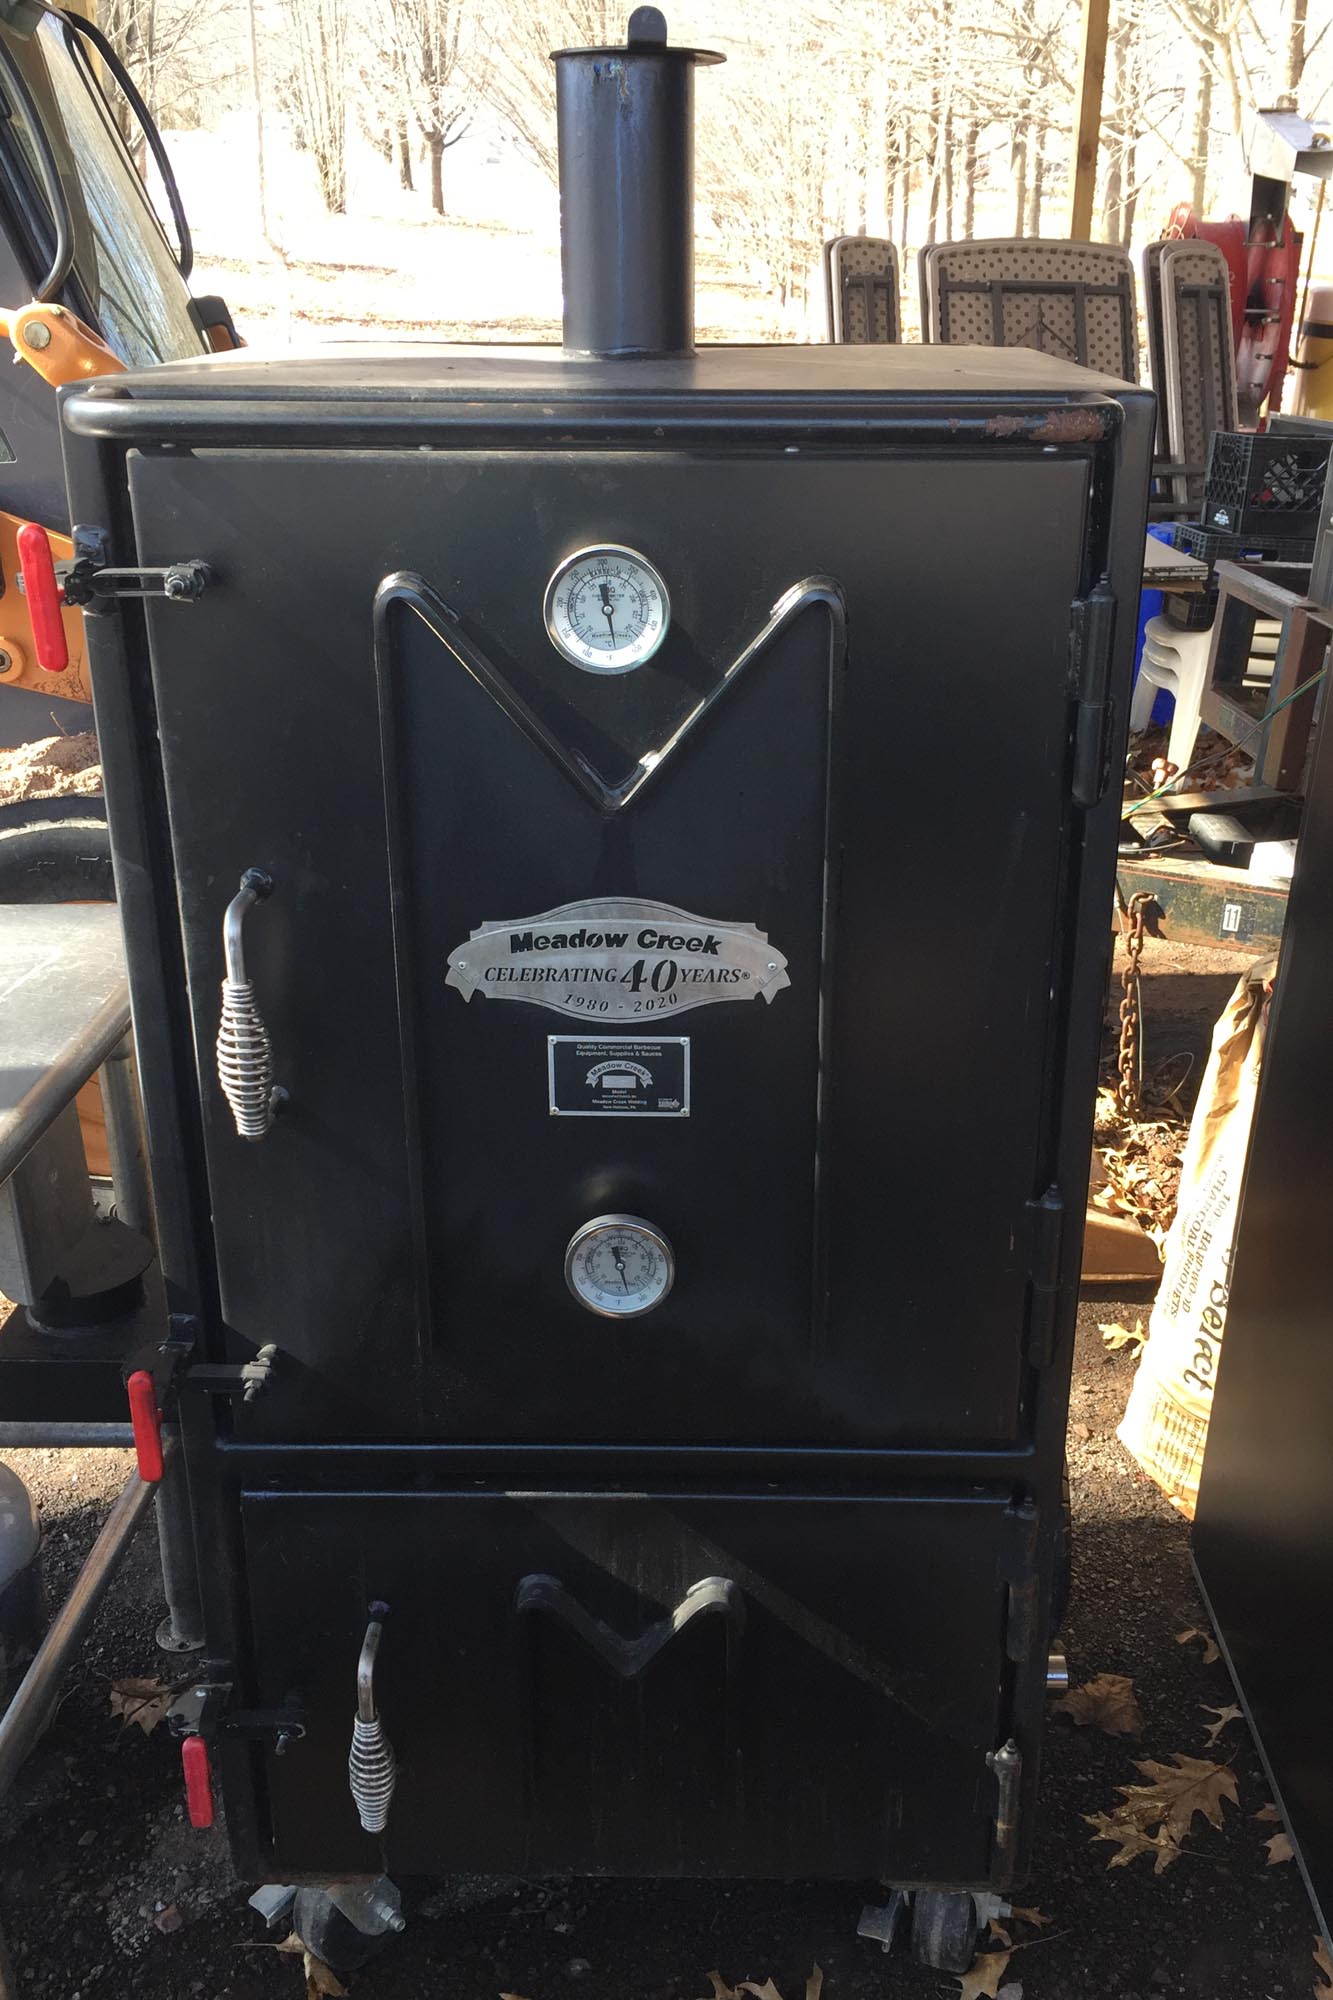 Meadow Creek BX50 Box Smoker used about 10 times